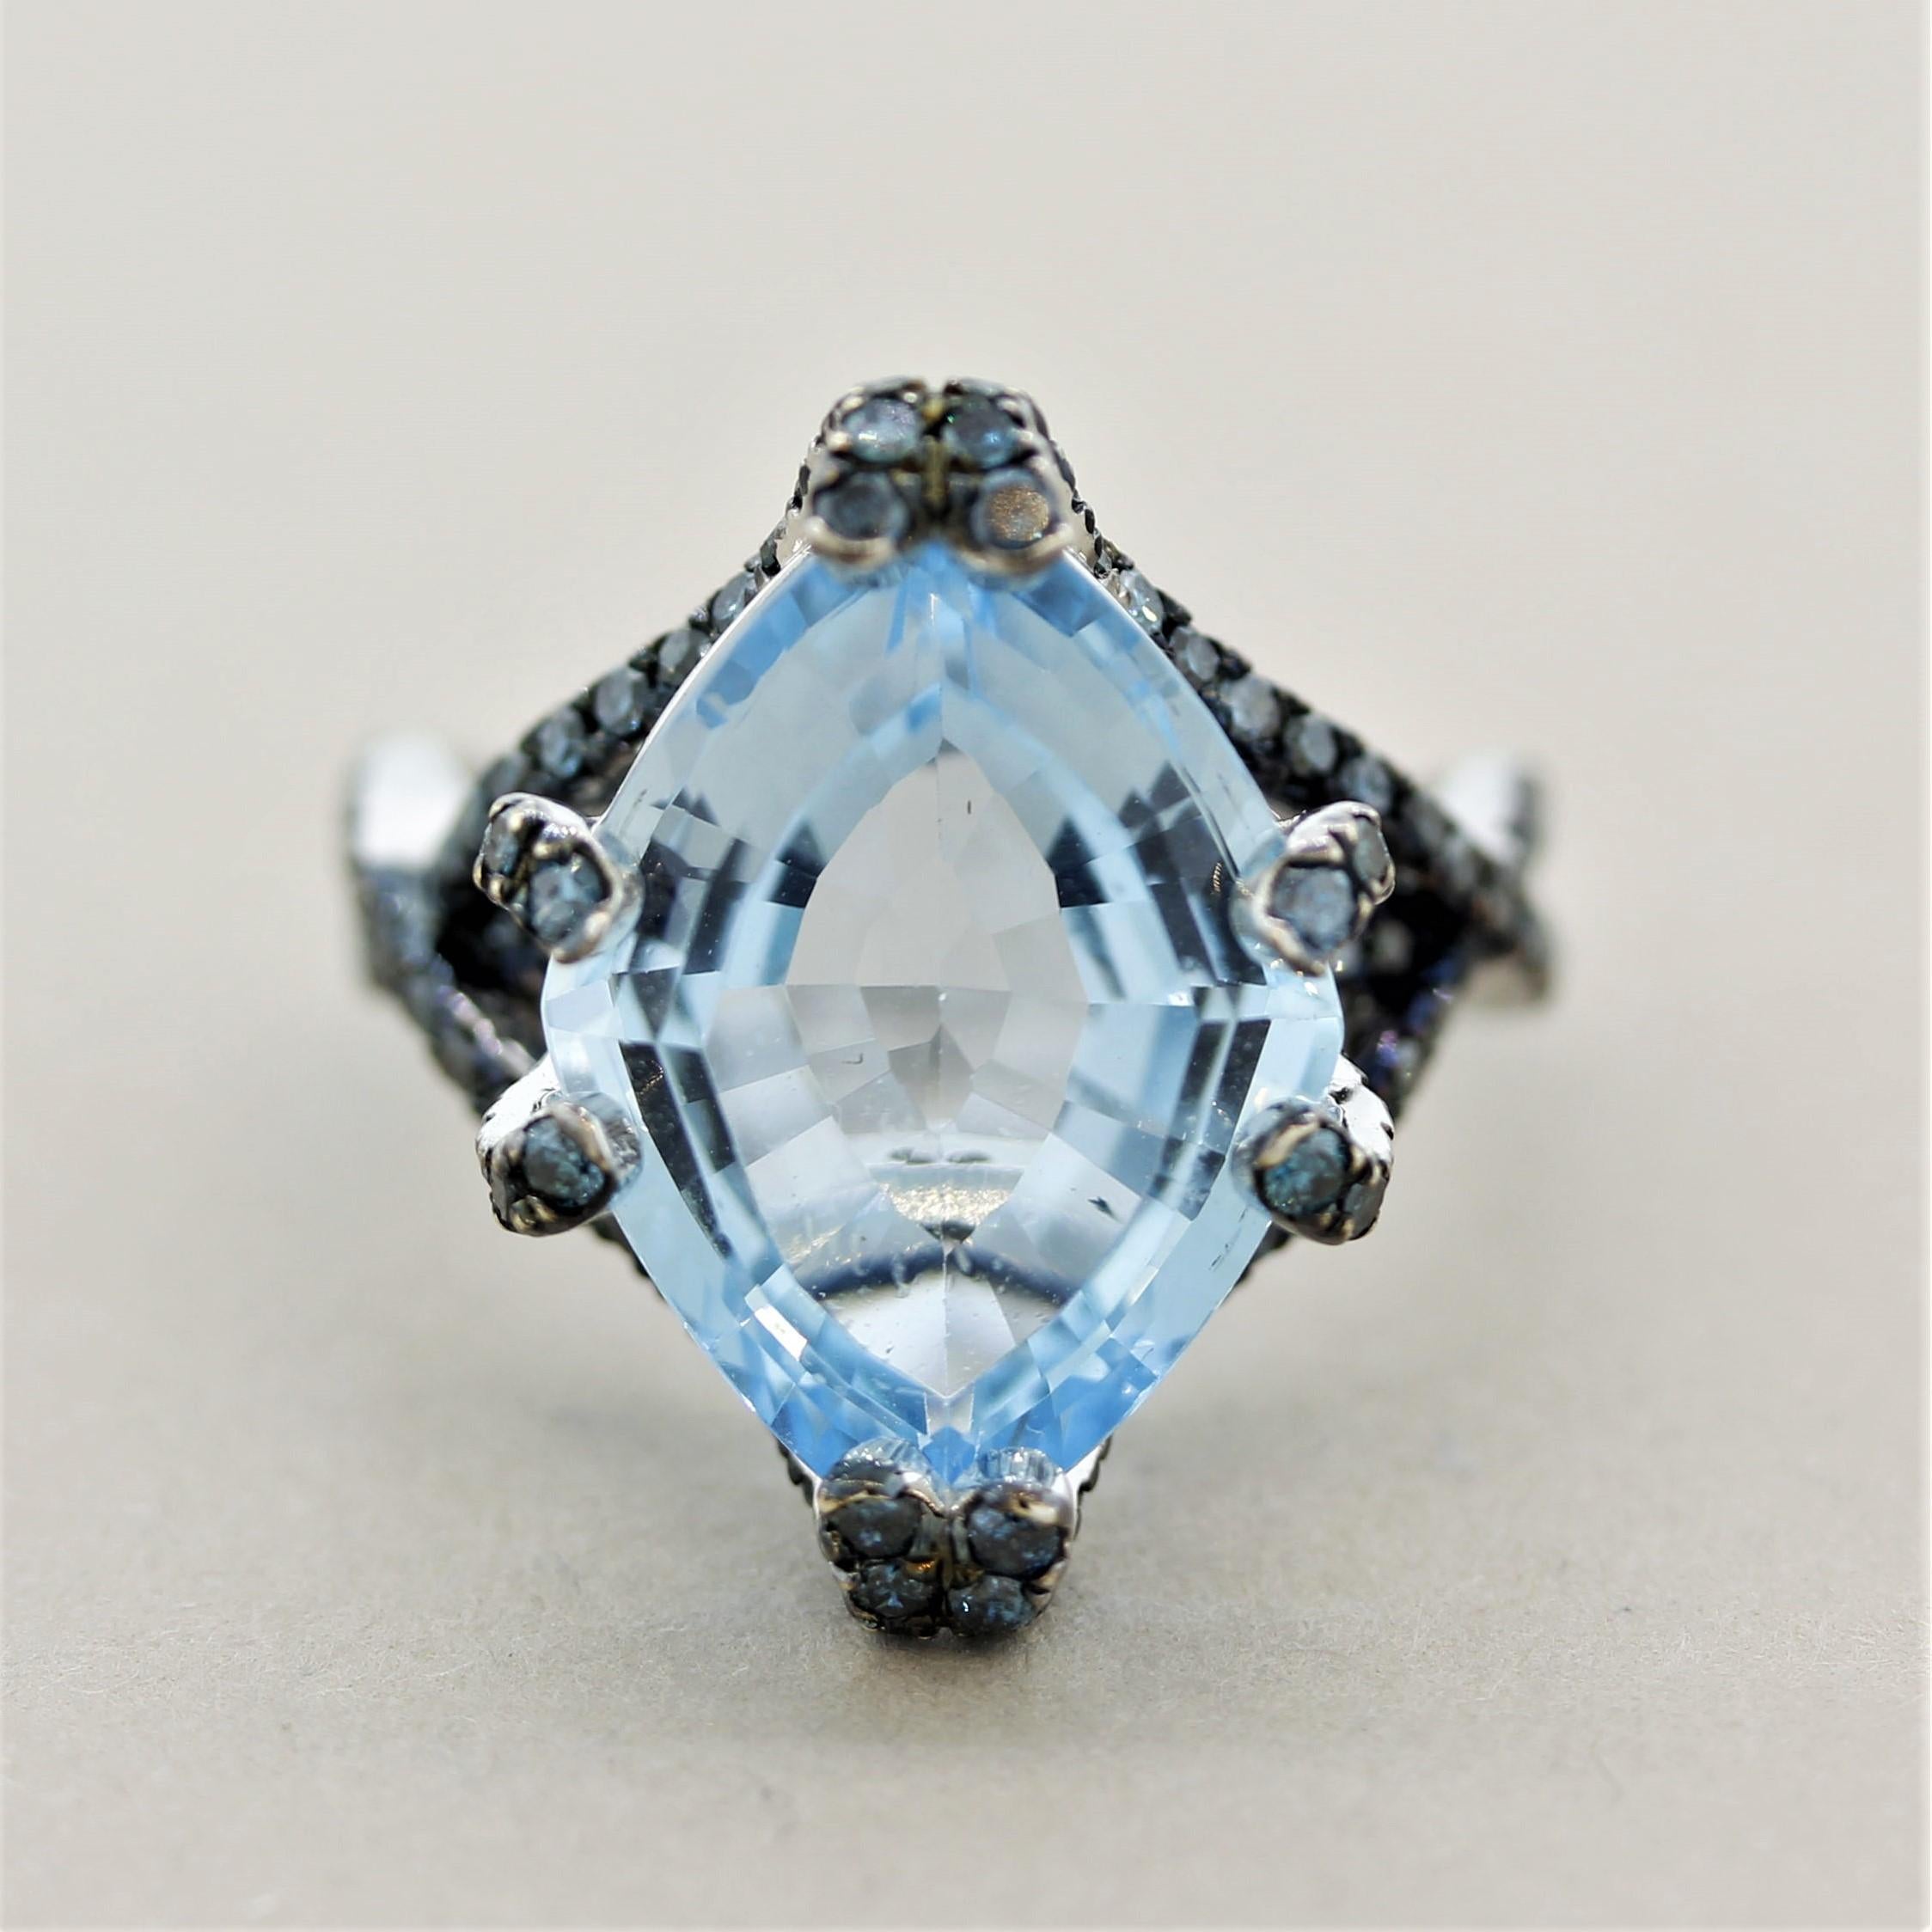 Simply a different ring made in a modern sexy style. It features a 10.70 carat diamond-shaped blue topaz set in the center with unique prong fixtures. It is complemented by 1.30 carats of blue diamonds set on the sides of the ring and running up the